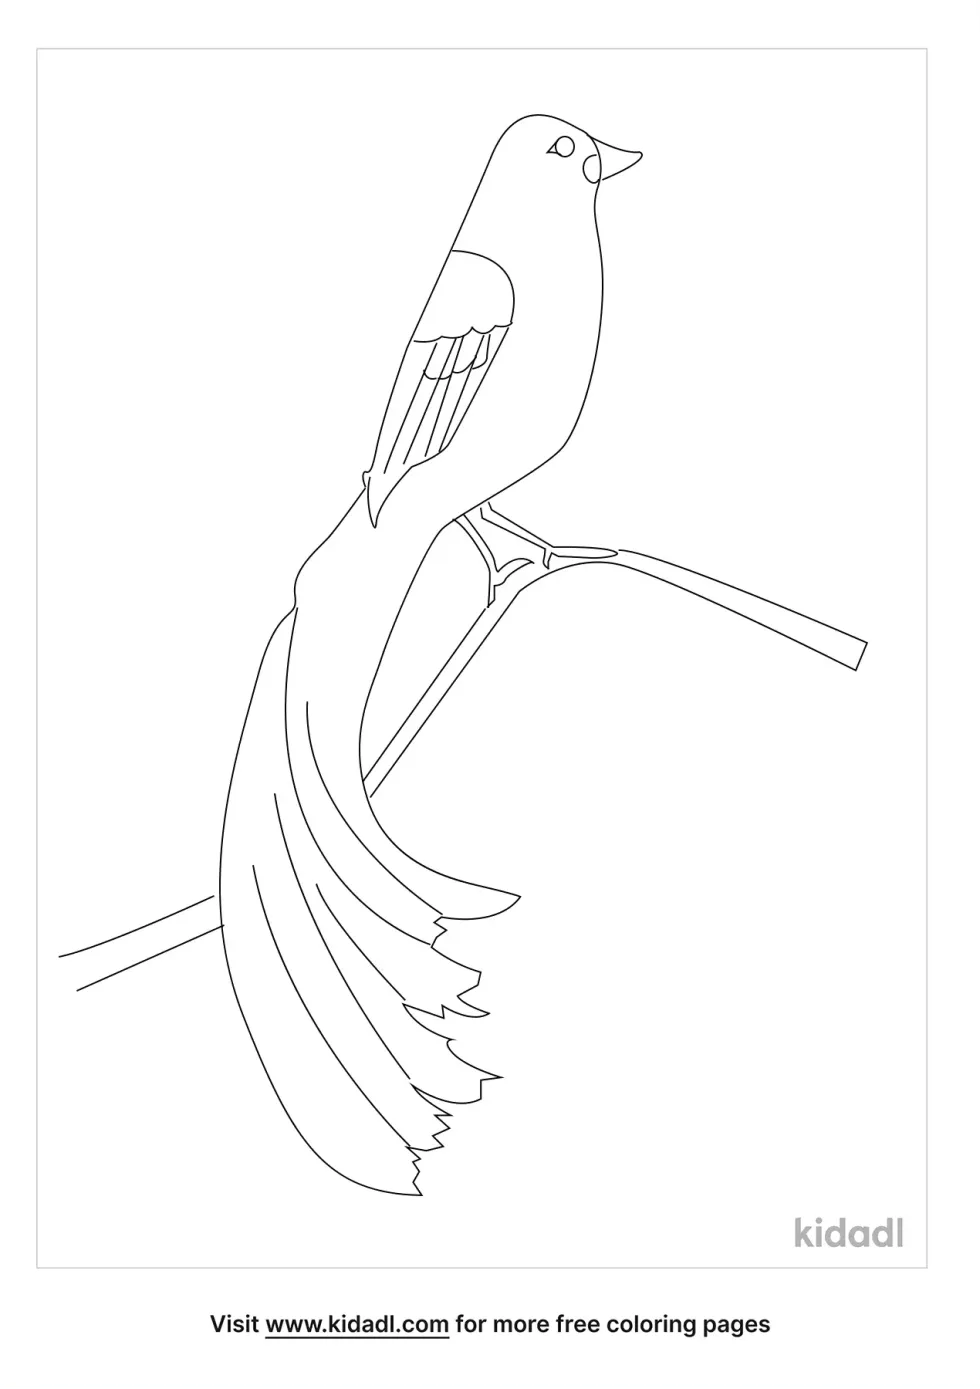 Jackson's Widowbird Coloring Page